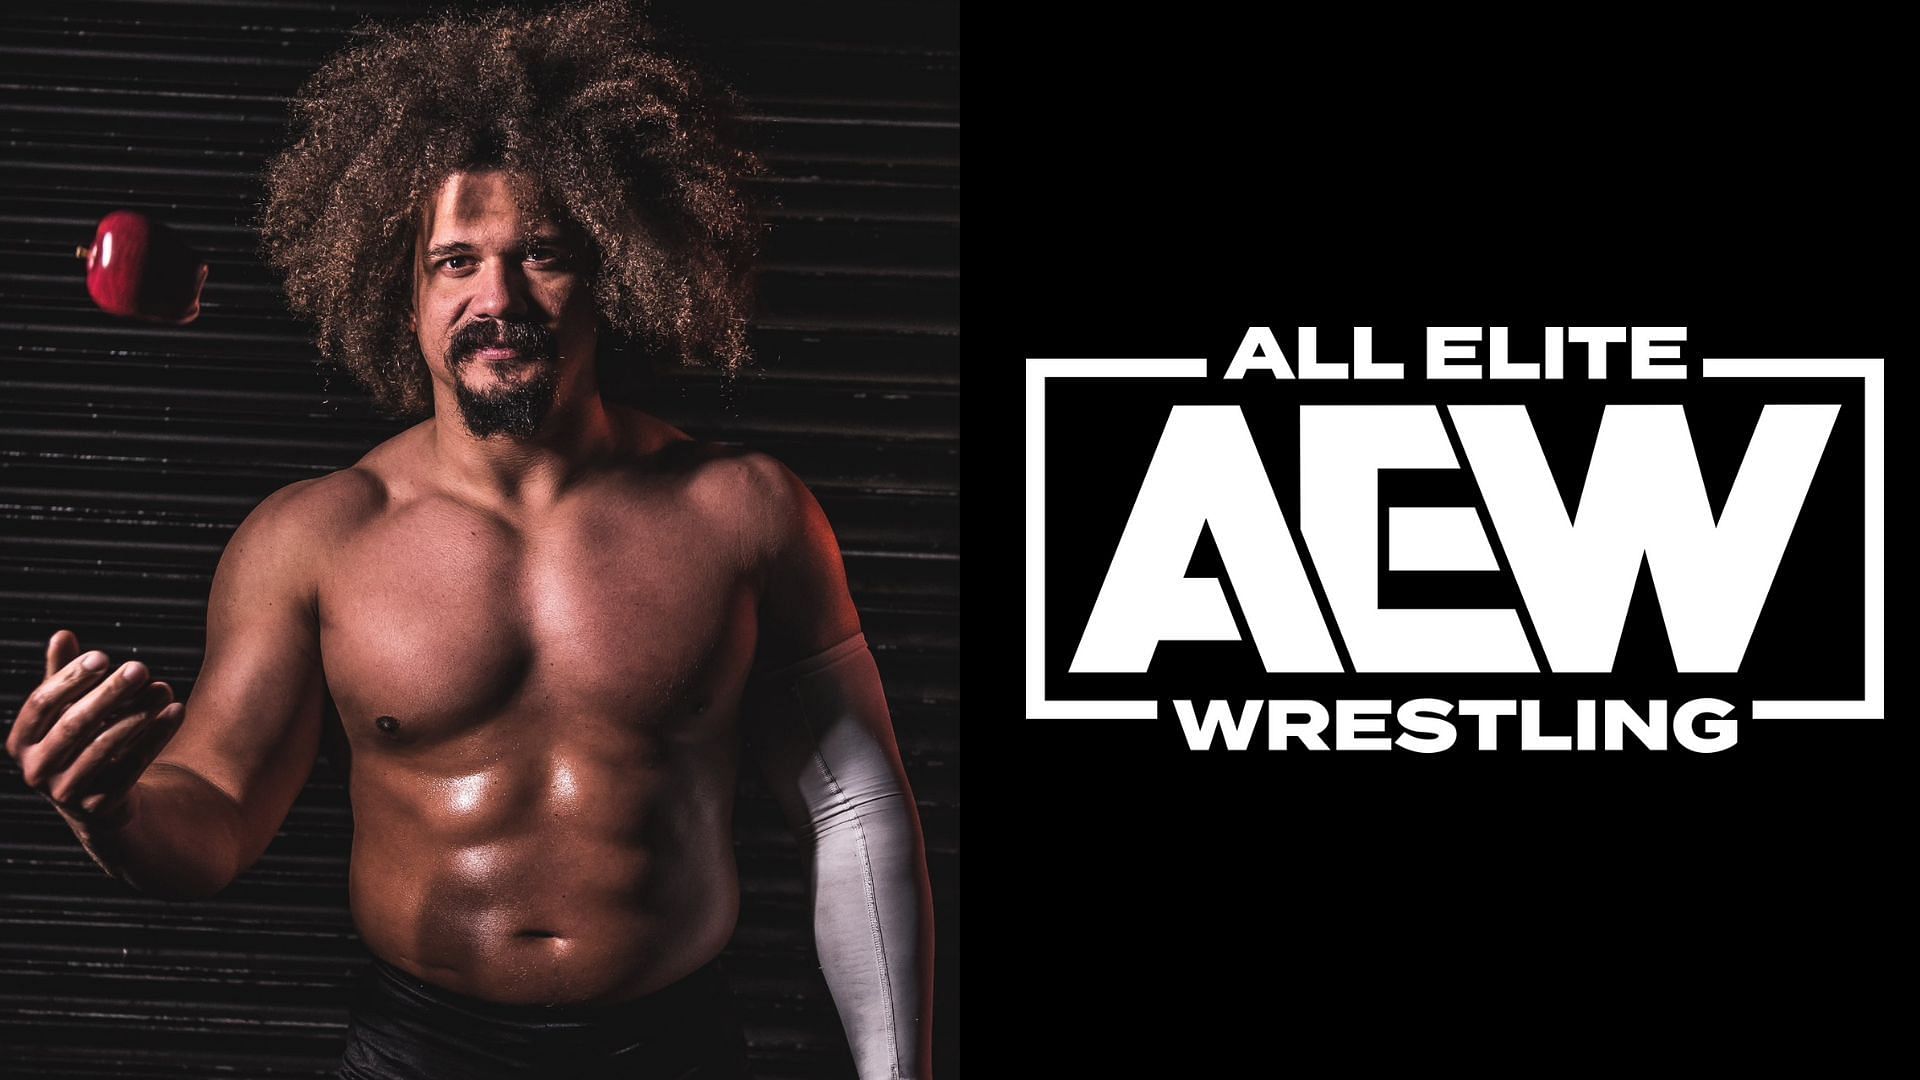 Why was Carlito disappointed after meeting this major AEW star?